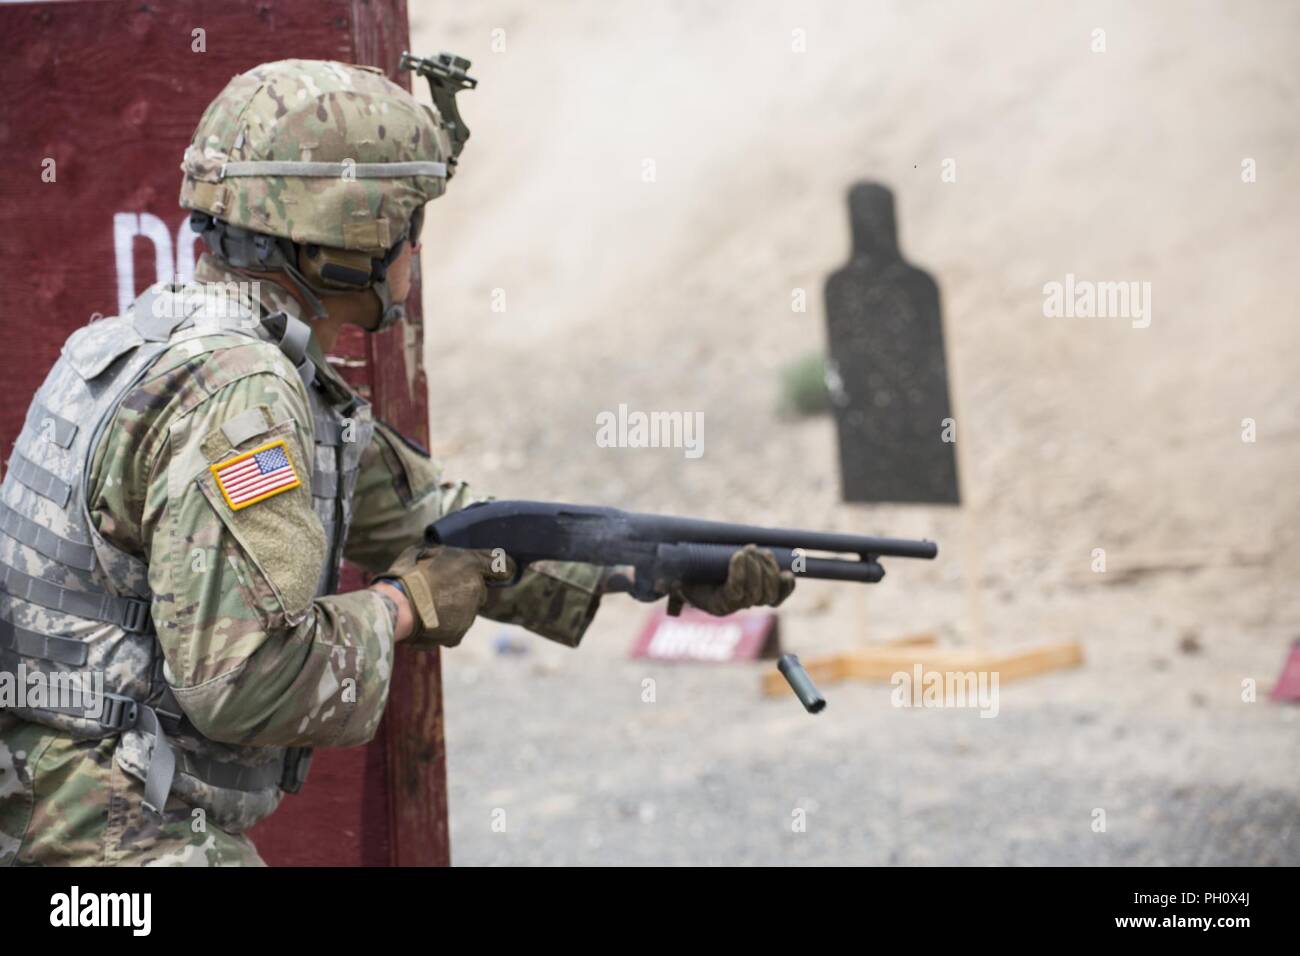 Spc. Corey Adams with Alpha Company, 1st Battalion, 161st Infantry Regiment, 81st Stryker Brigade Combat Team fires an M500 shotgun during short range marksmanship training at the Yakima Training Center, Yakima, Wash. June 21, 2018.  Short range marksmanship training helps soldiers increase their accuracy in urban combat situations. Stock Photo